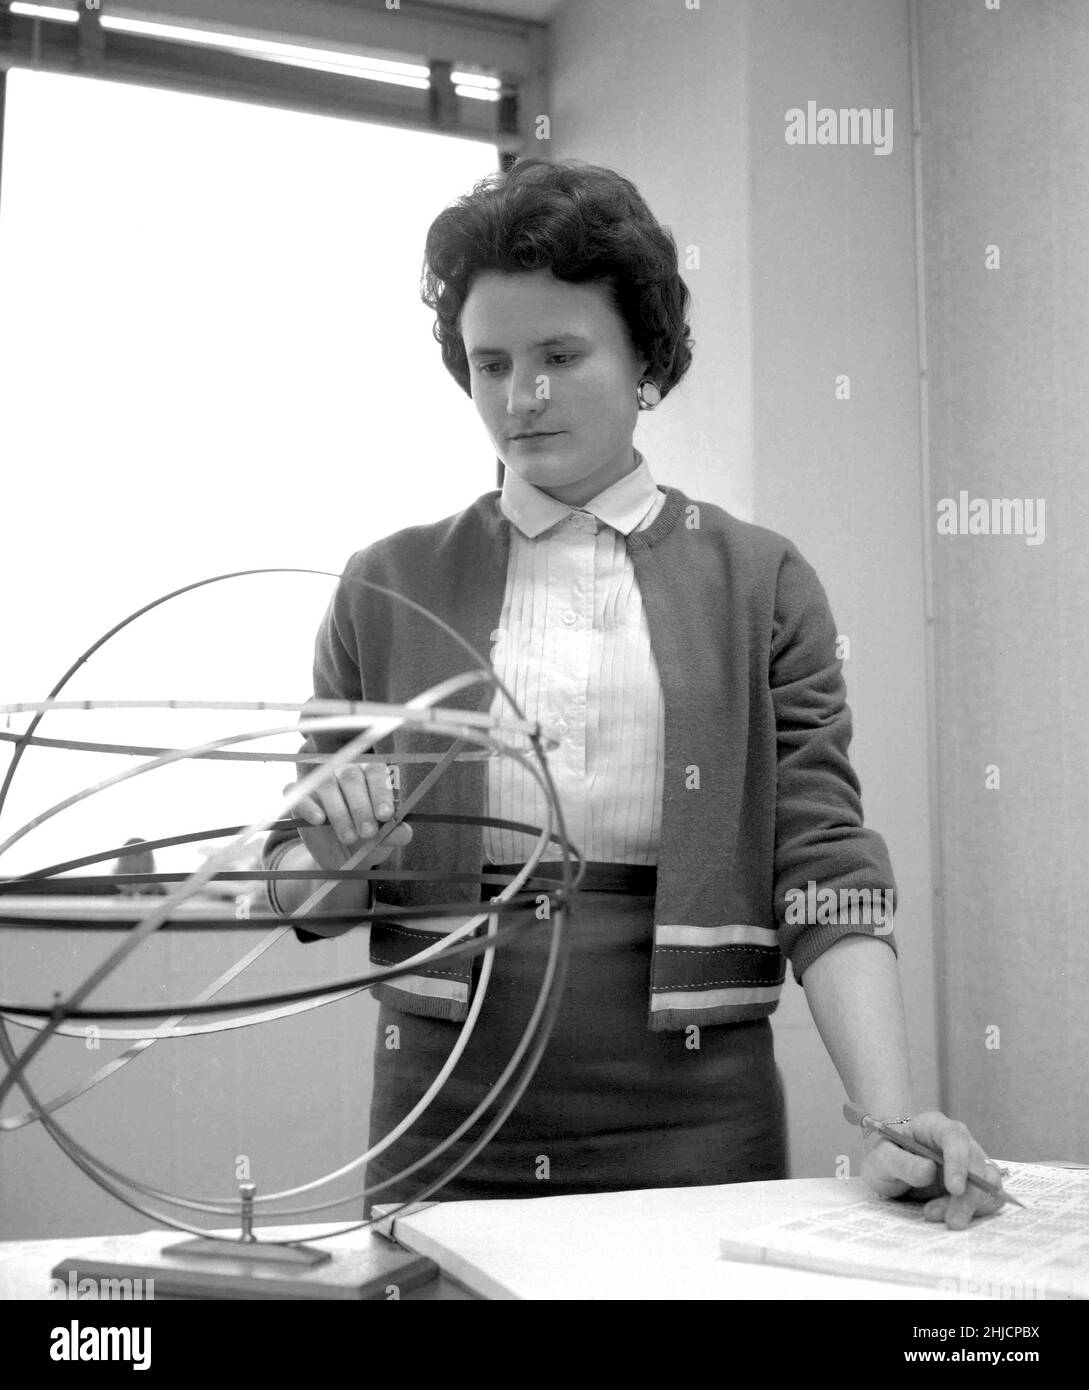 Aerospace engineer Ethel Heinecke Bauer  working on trajectories at NASA‚Äôs Marshall Space Flight Center in 1965. Over the course of her long, barrier-breaking career, Ethel Bauer made instrumental contributions to many NASA programs. She retired on January 31, 1993 after thirty-two years of federal service. Stock Photo